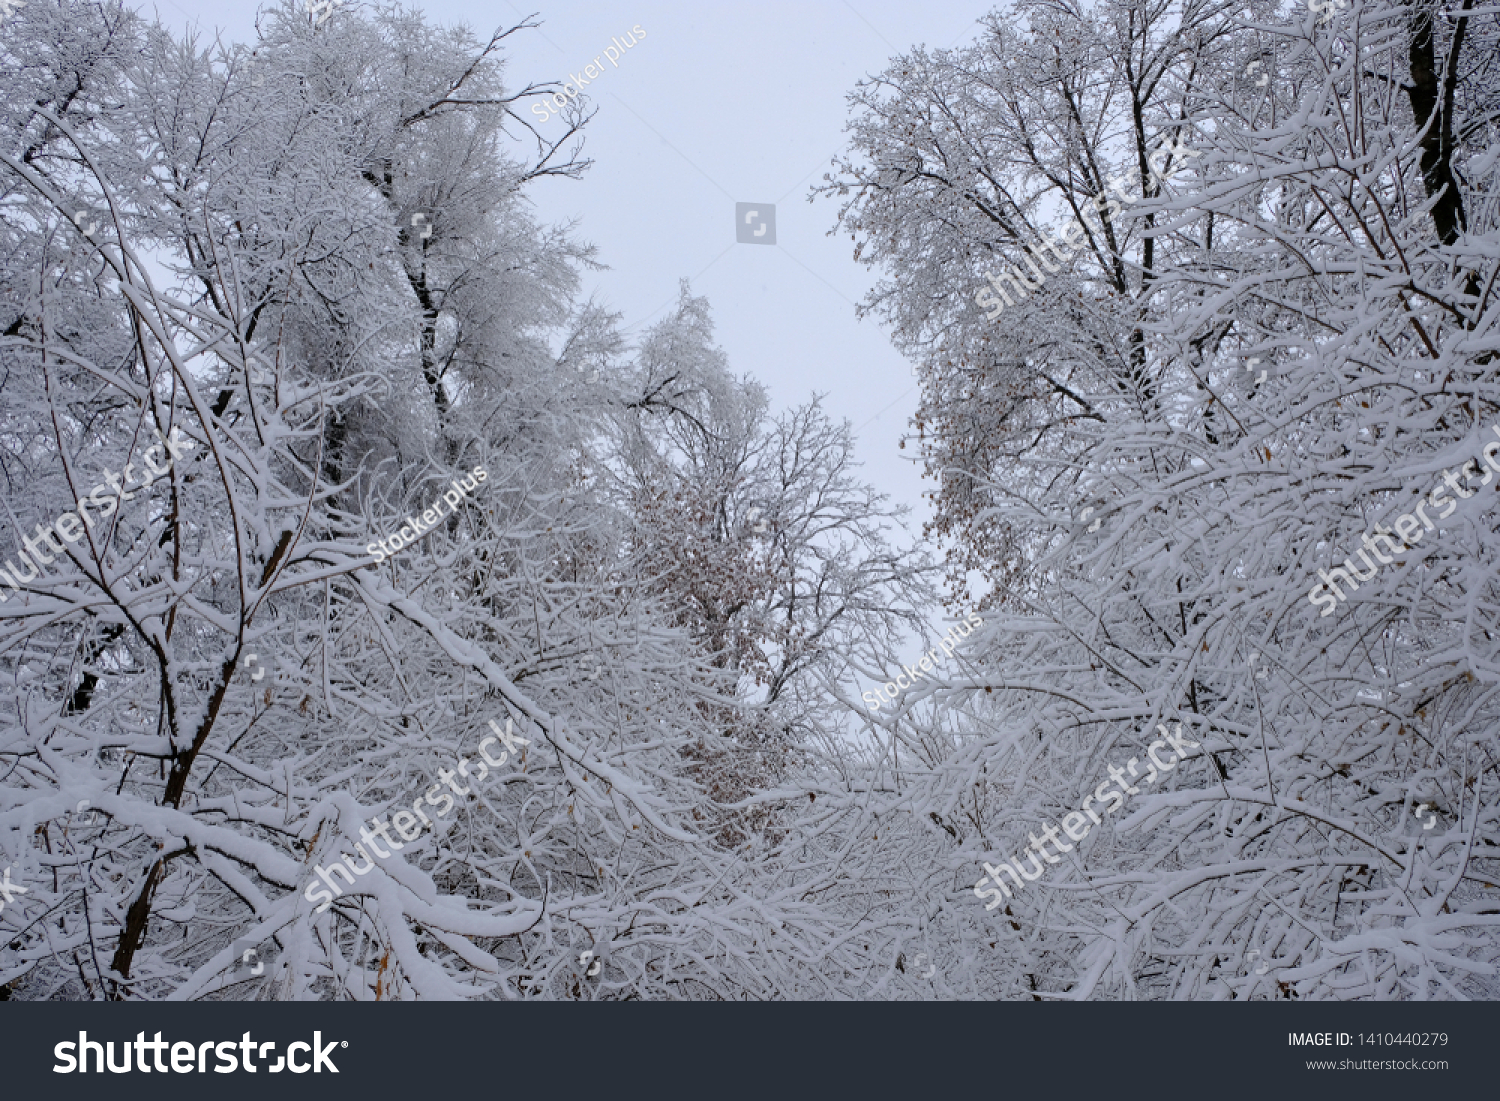 Winter landscape with trees cowered with snow after snowfall. Snowfall concept. #1410440279